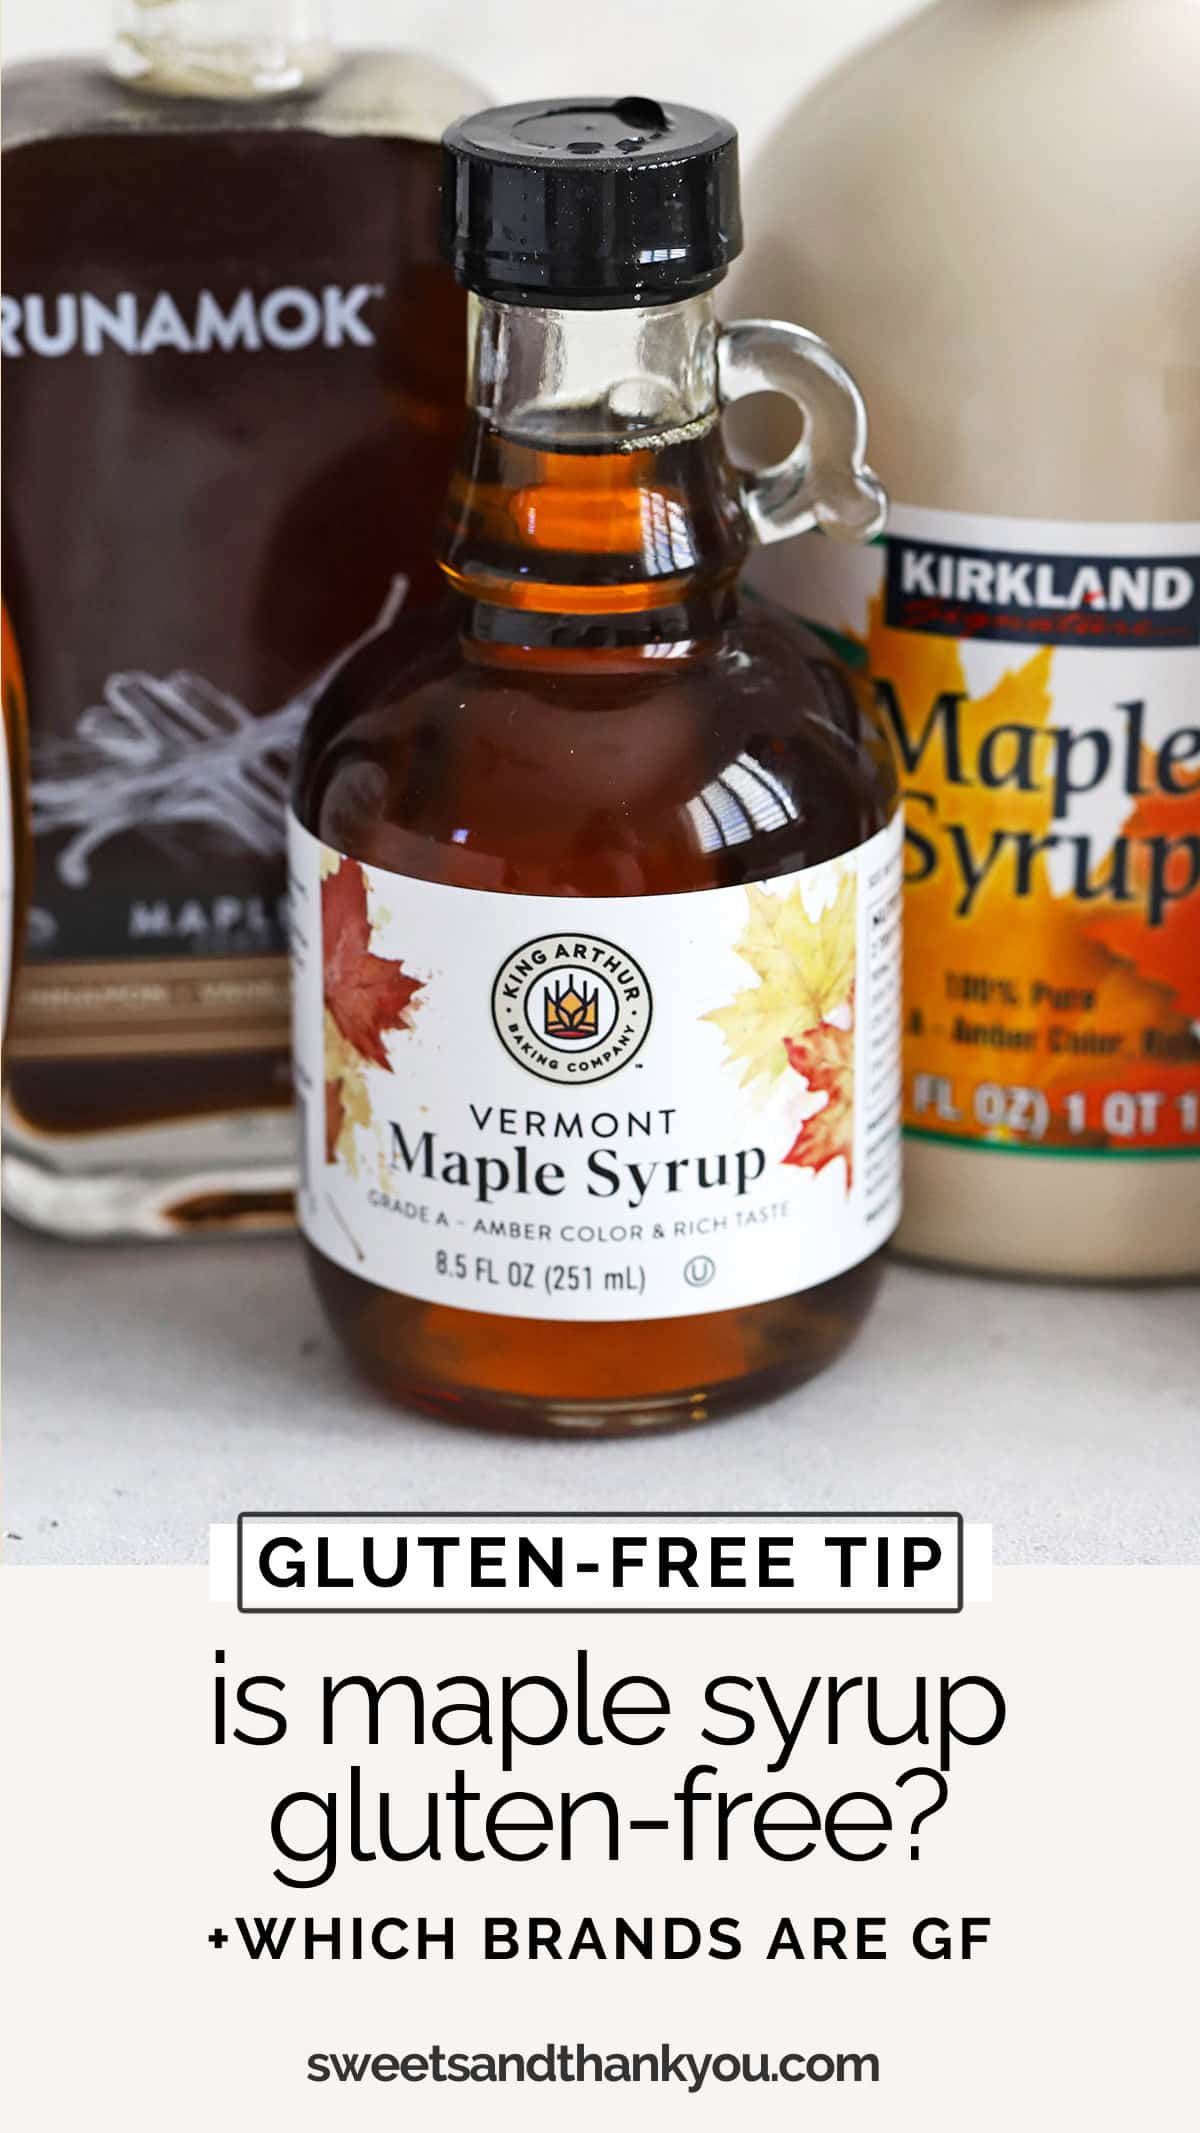 Is Maple Syrup Gluten-Free? We'll walk you through everything you need to know about gluten-free syrup, gluten-free pancake syrup and more! // is pancake syrup gluten free / is pearl milling syrup gluten free / is log cabin syrup gluten free / is mrs. butterworth syrup gluten free / is hungry jack syrup gluten free / is pure maple syrup gluten-free / is syrup gluten free